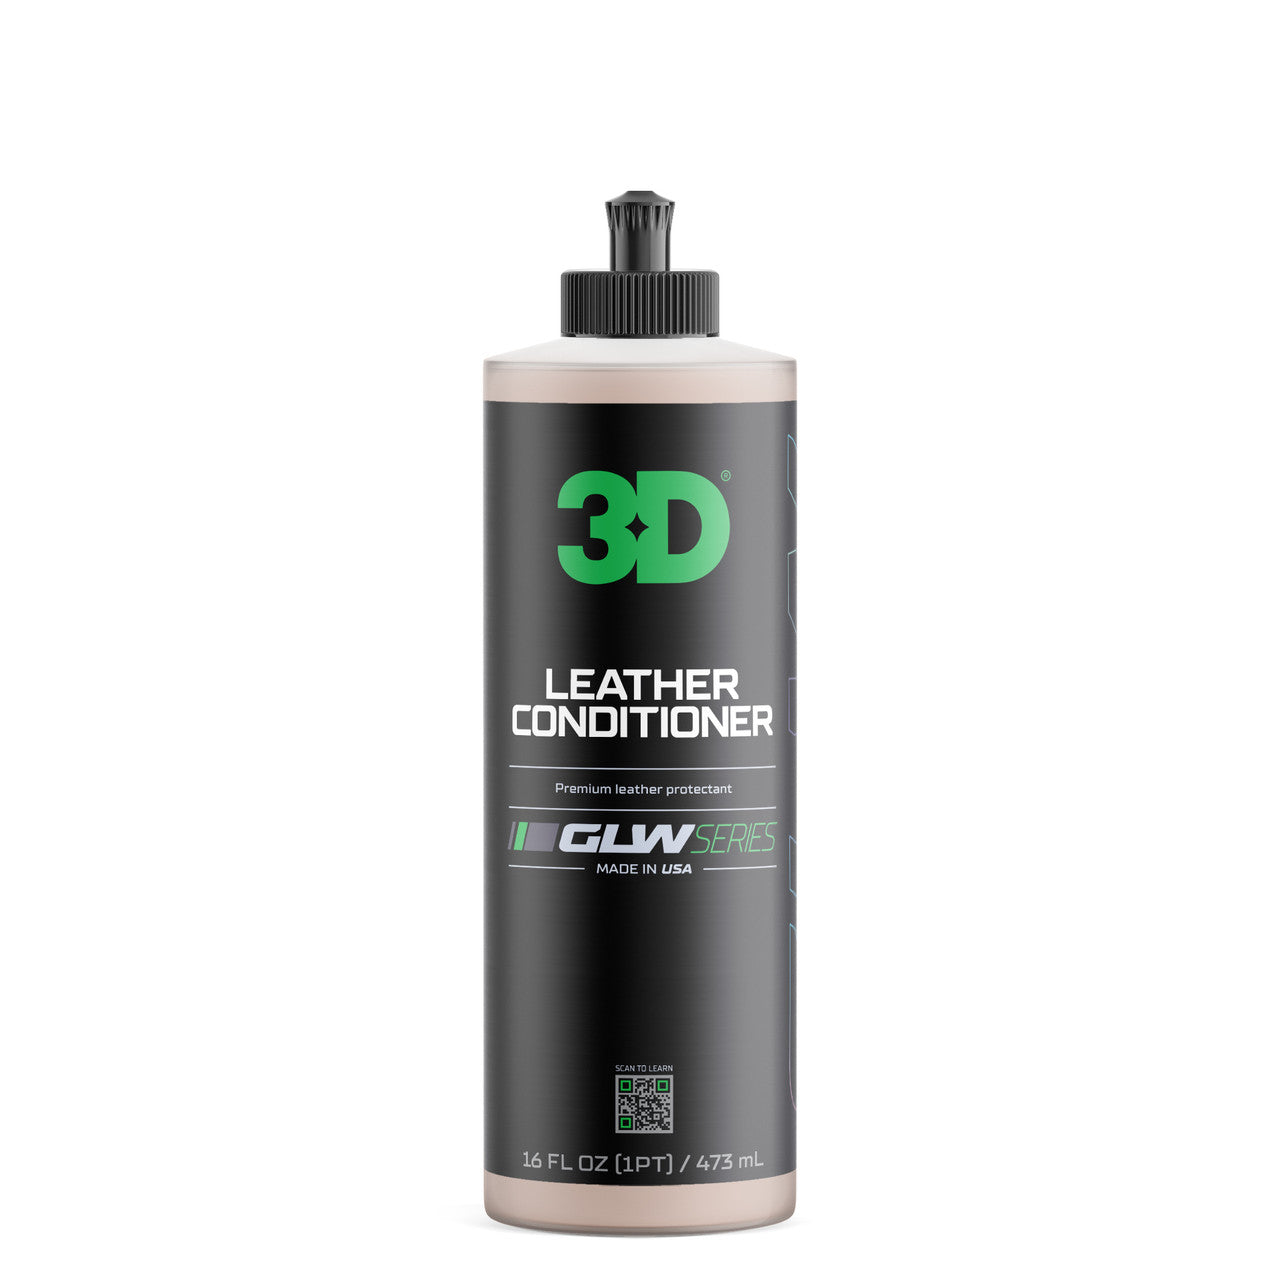 3D GLW Series Leather Conditioner 16oz